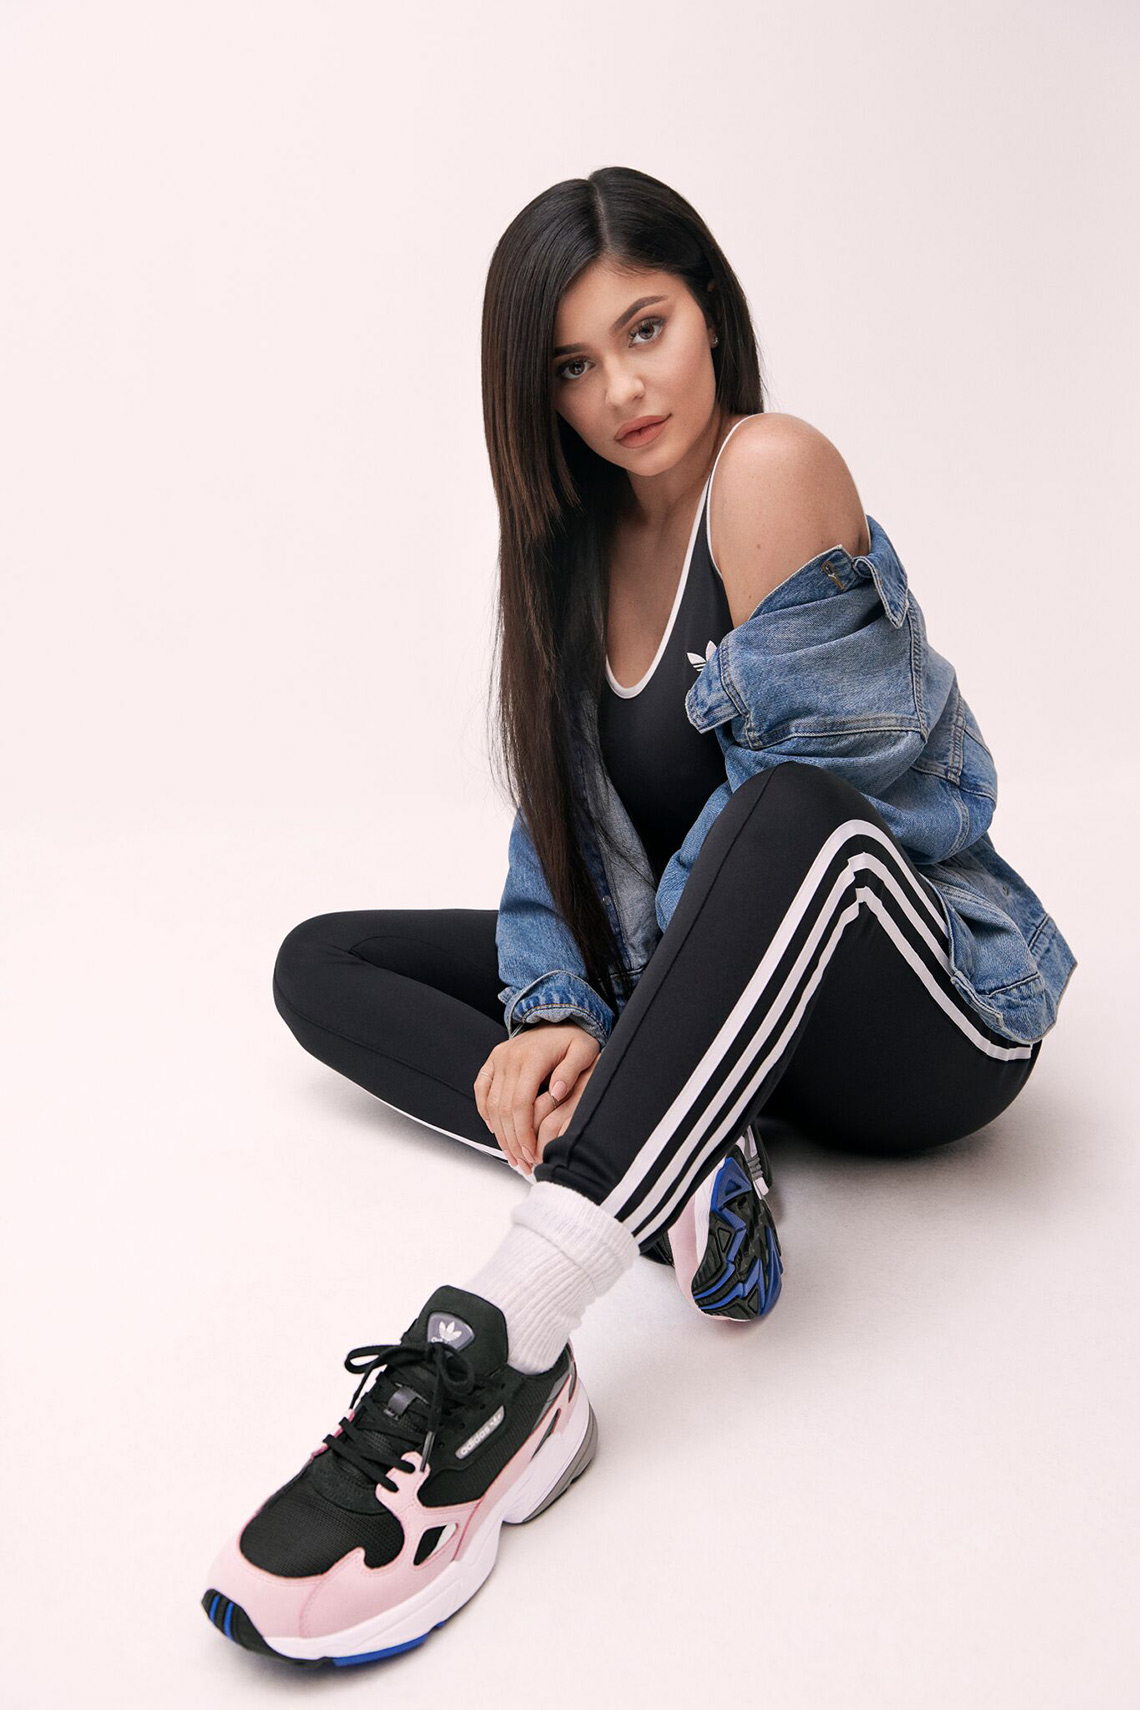 How Much Do Kylie Jenner's Adidas Falcon Sneakers Cost? They're